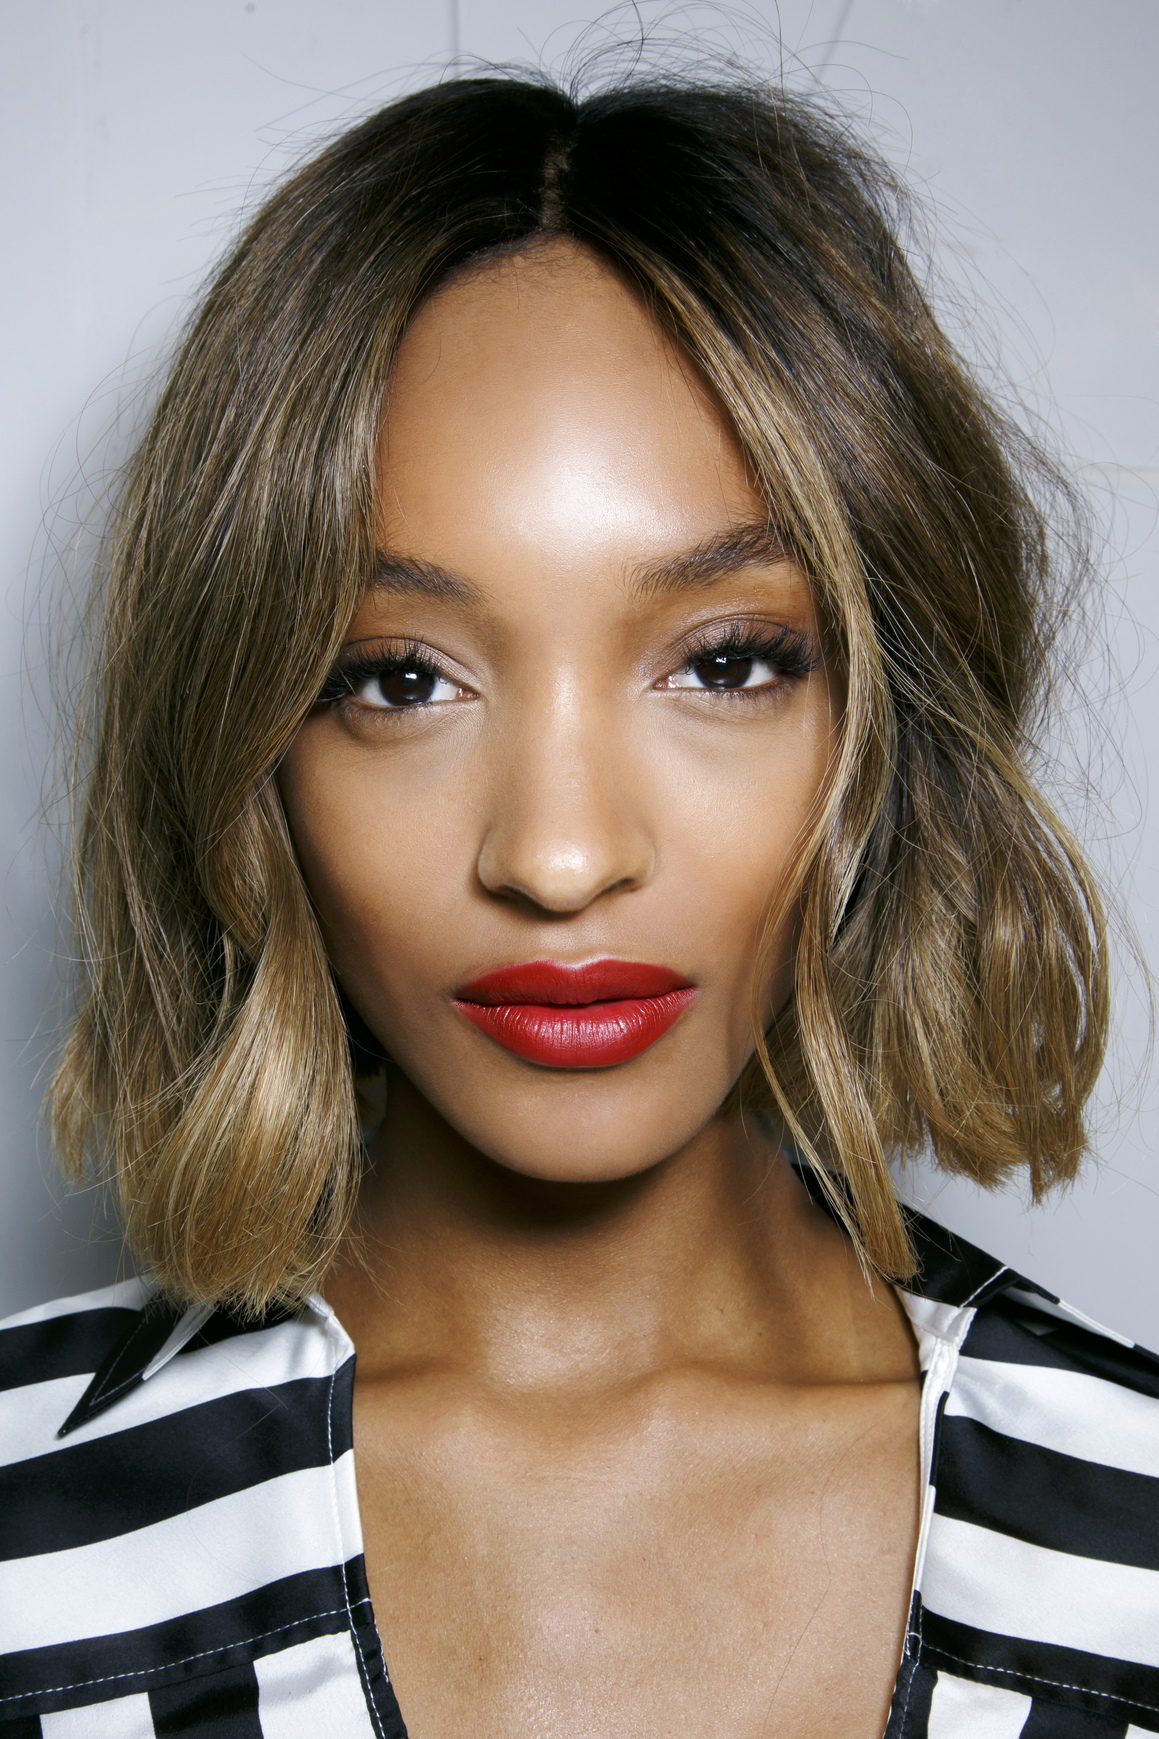 The Very Best Short Haircuts for Winter | StyleCaster